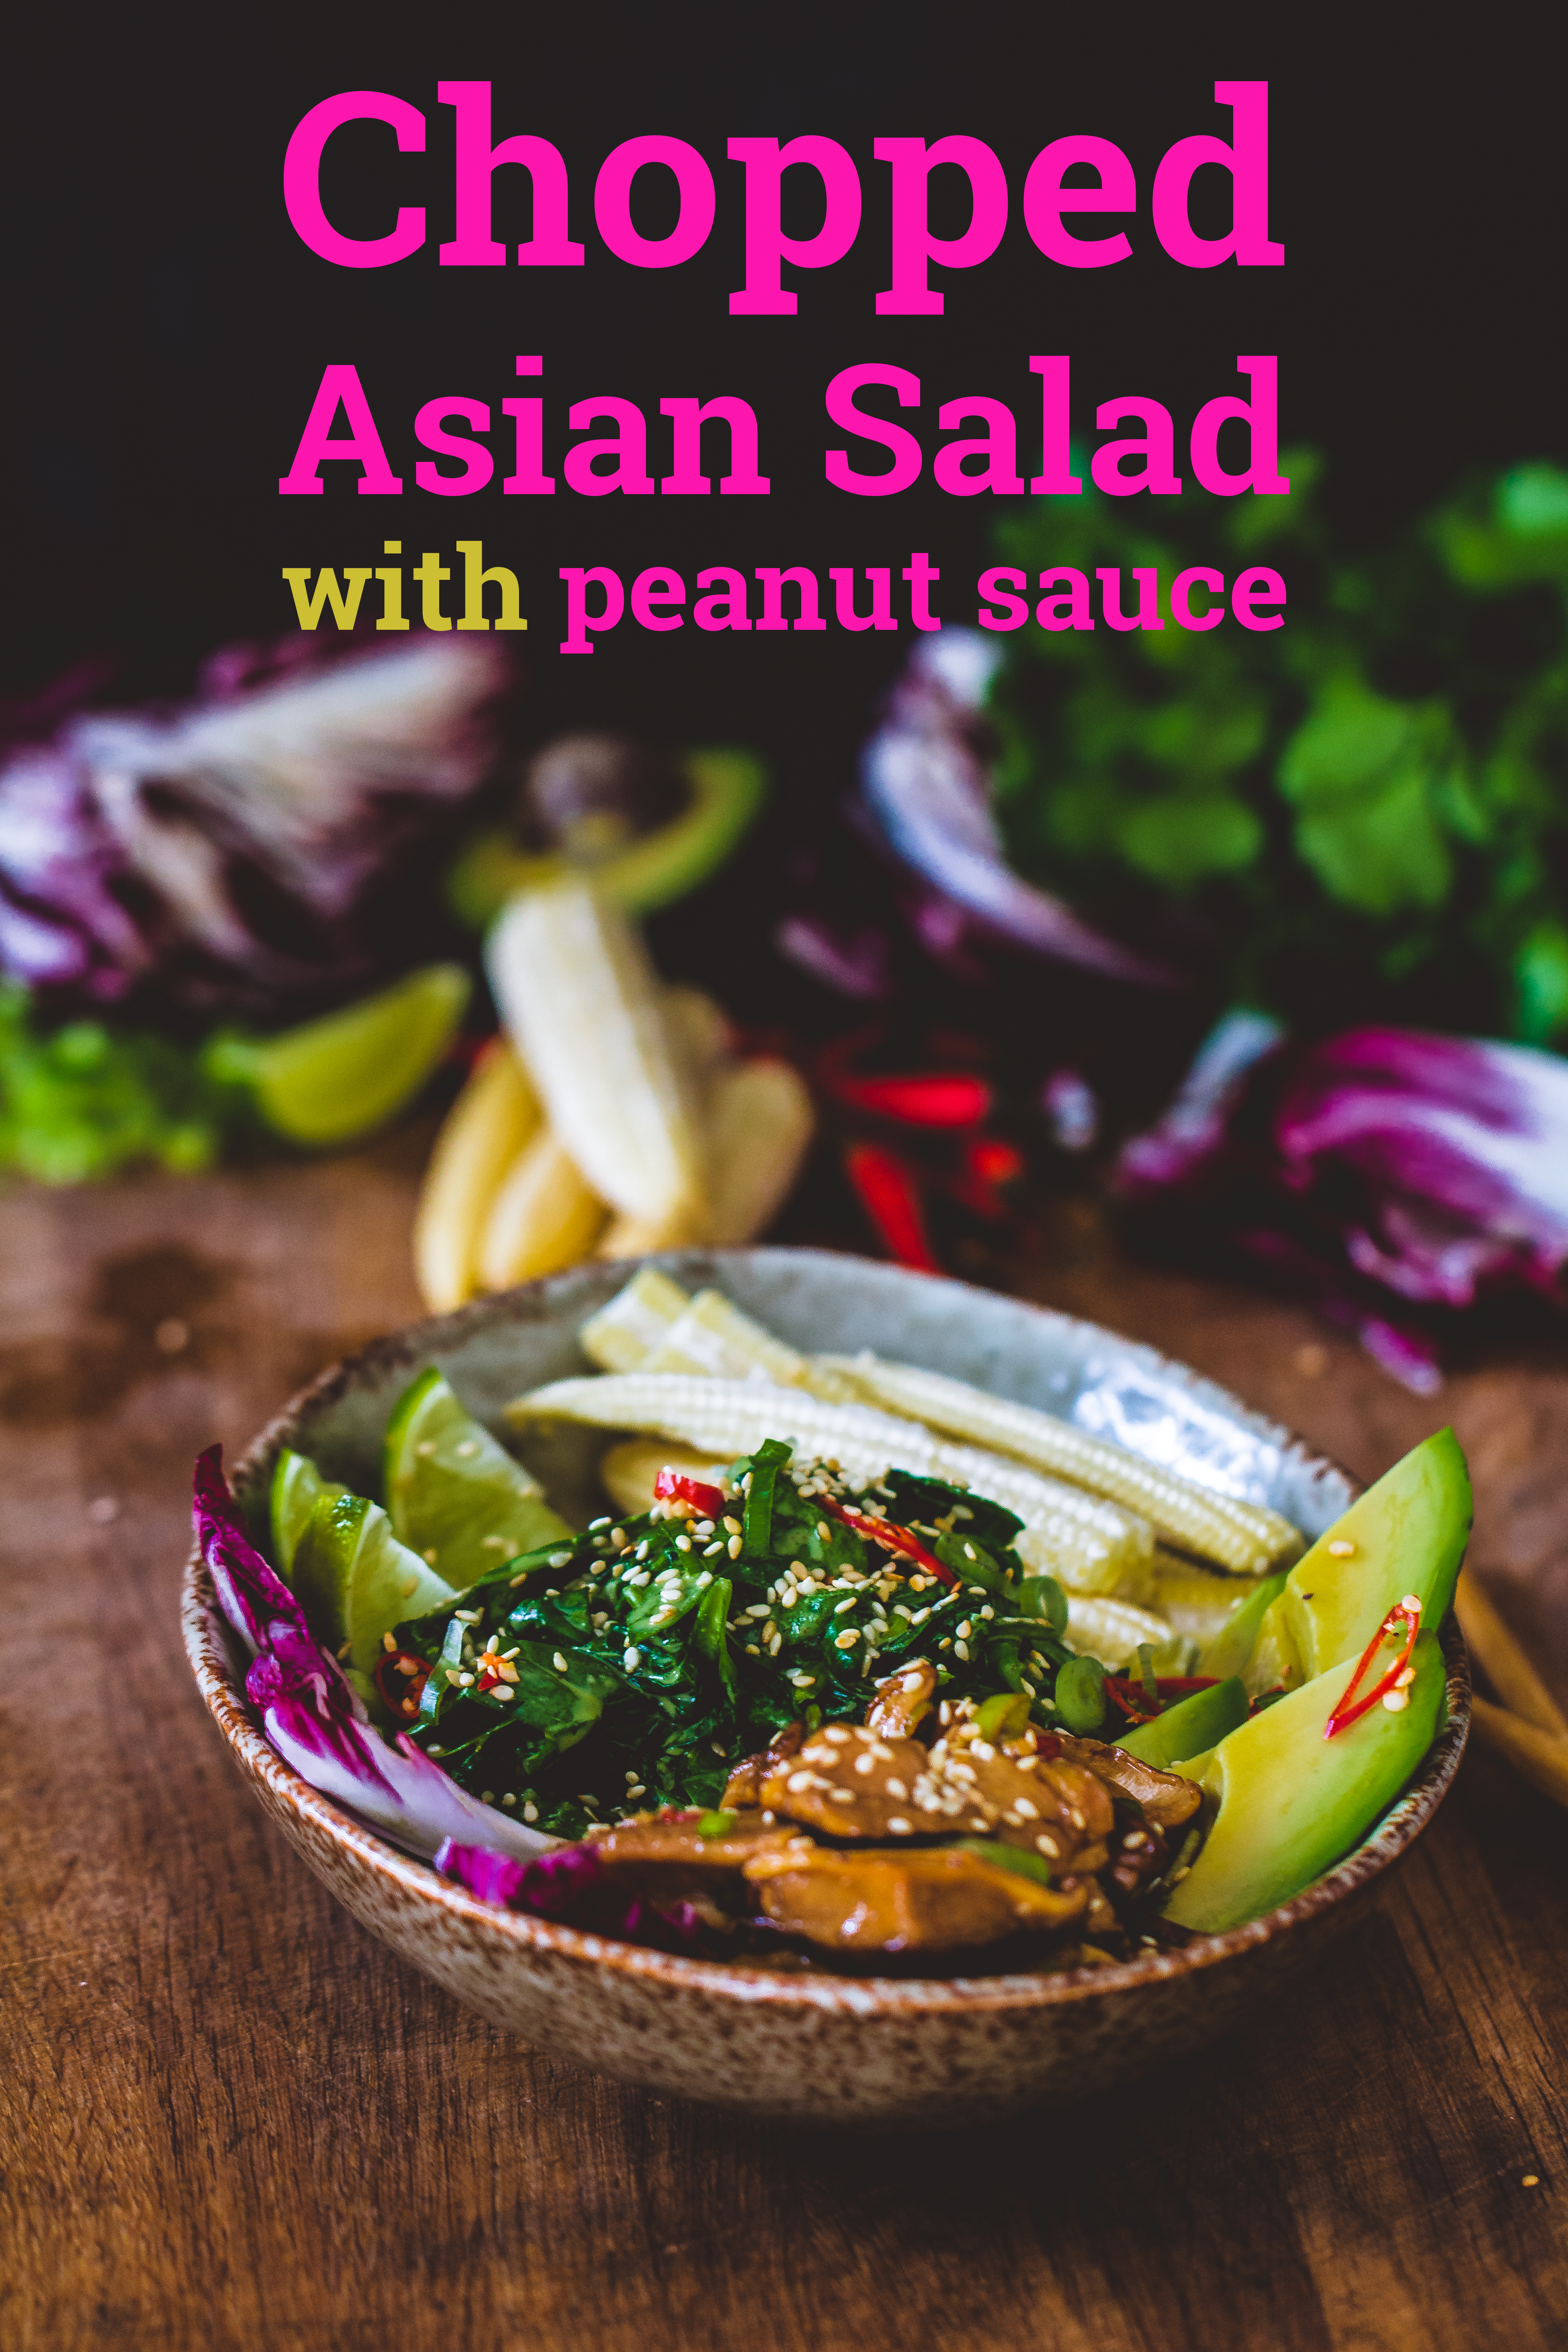 Asian peanut salad dressing on a chopped asian salad in a bowl on a wooden surface with vegetables in the background